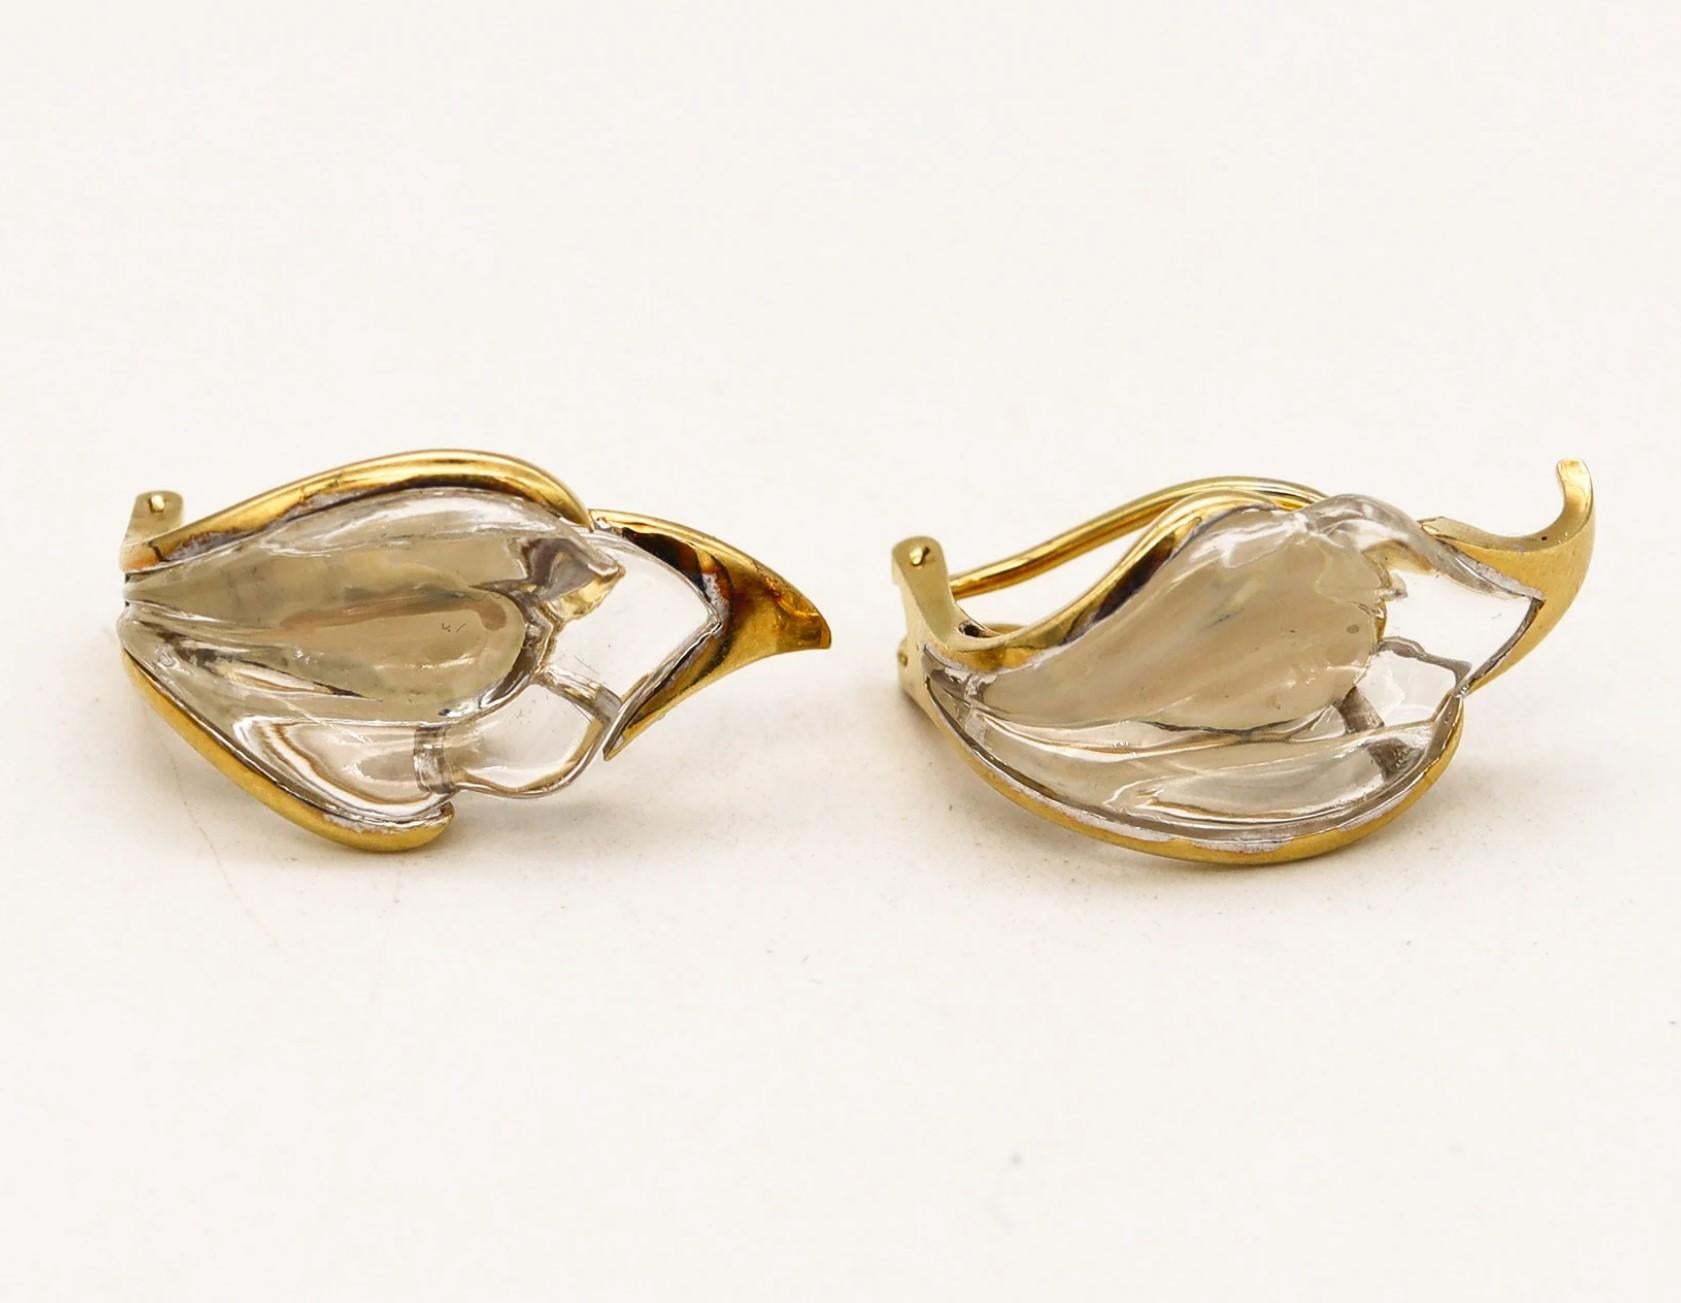 Tiffany & Co 1977 Elsa Peretti Rock Quartz Lilies Clips Earrings In 18Kt Gold In Excellent Condition For Sale In Miami, FL